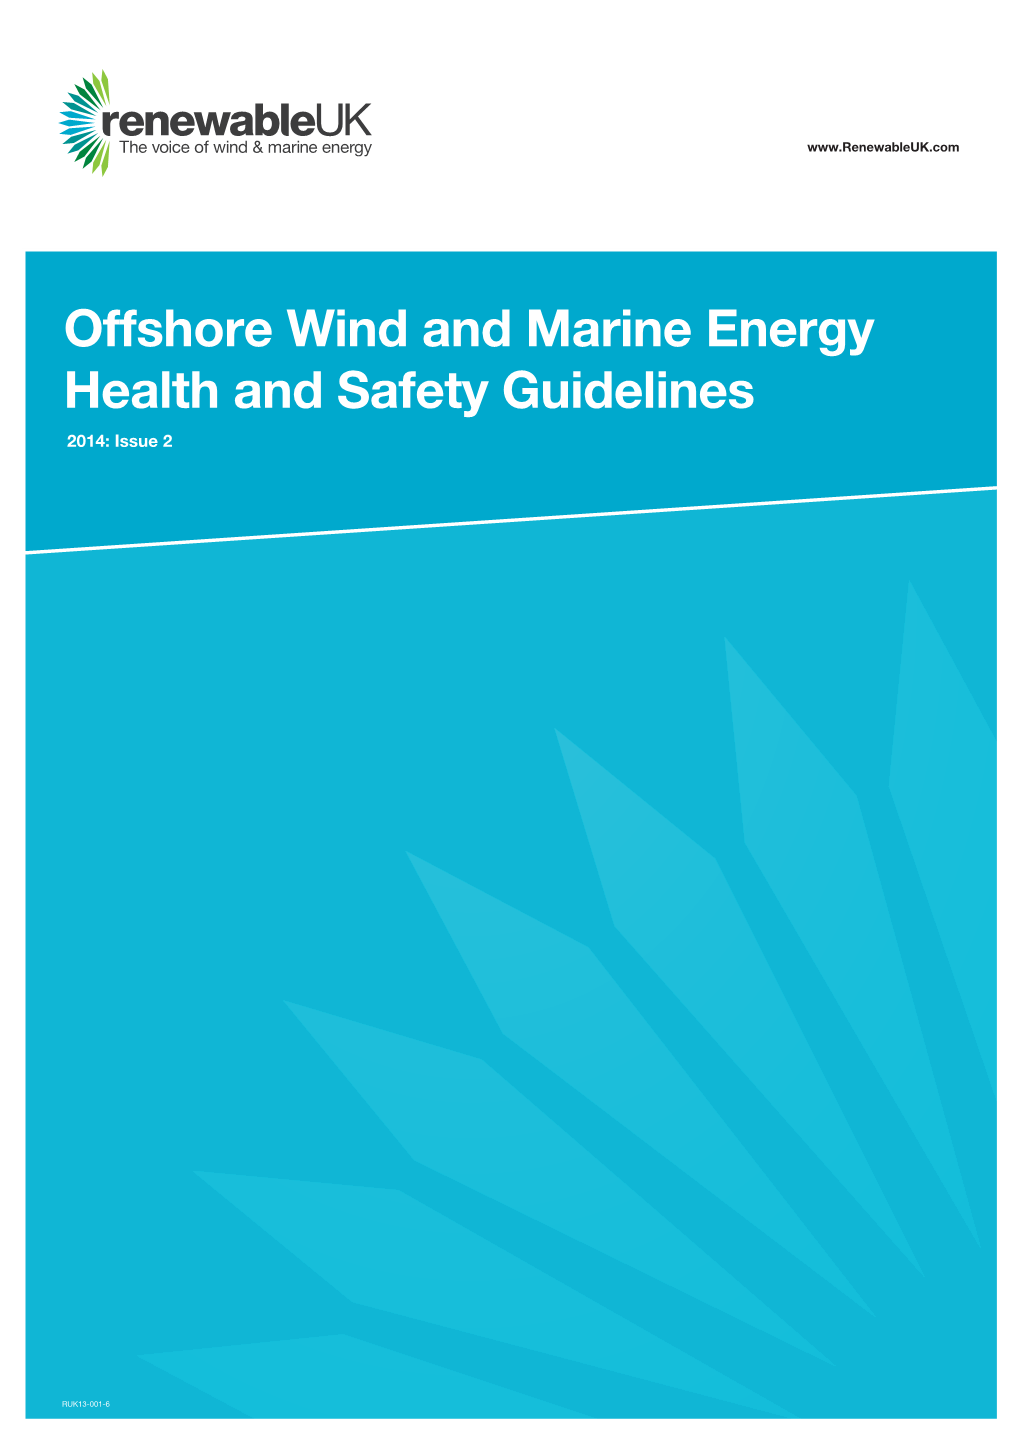 Offshore Wind and Marine Energy Health and Safety Guidelines 2014: Issue 2